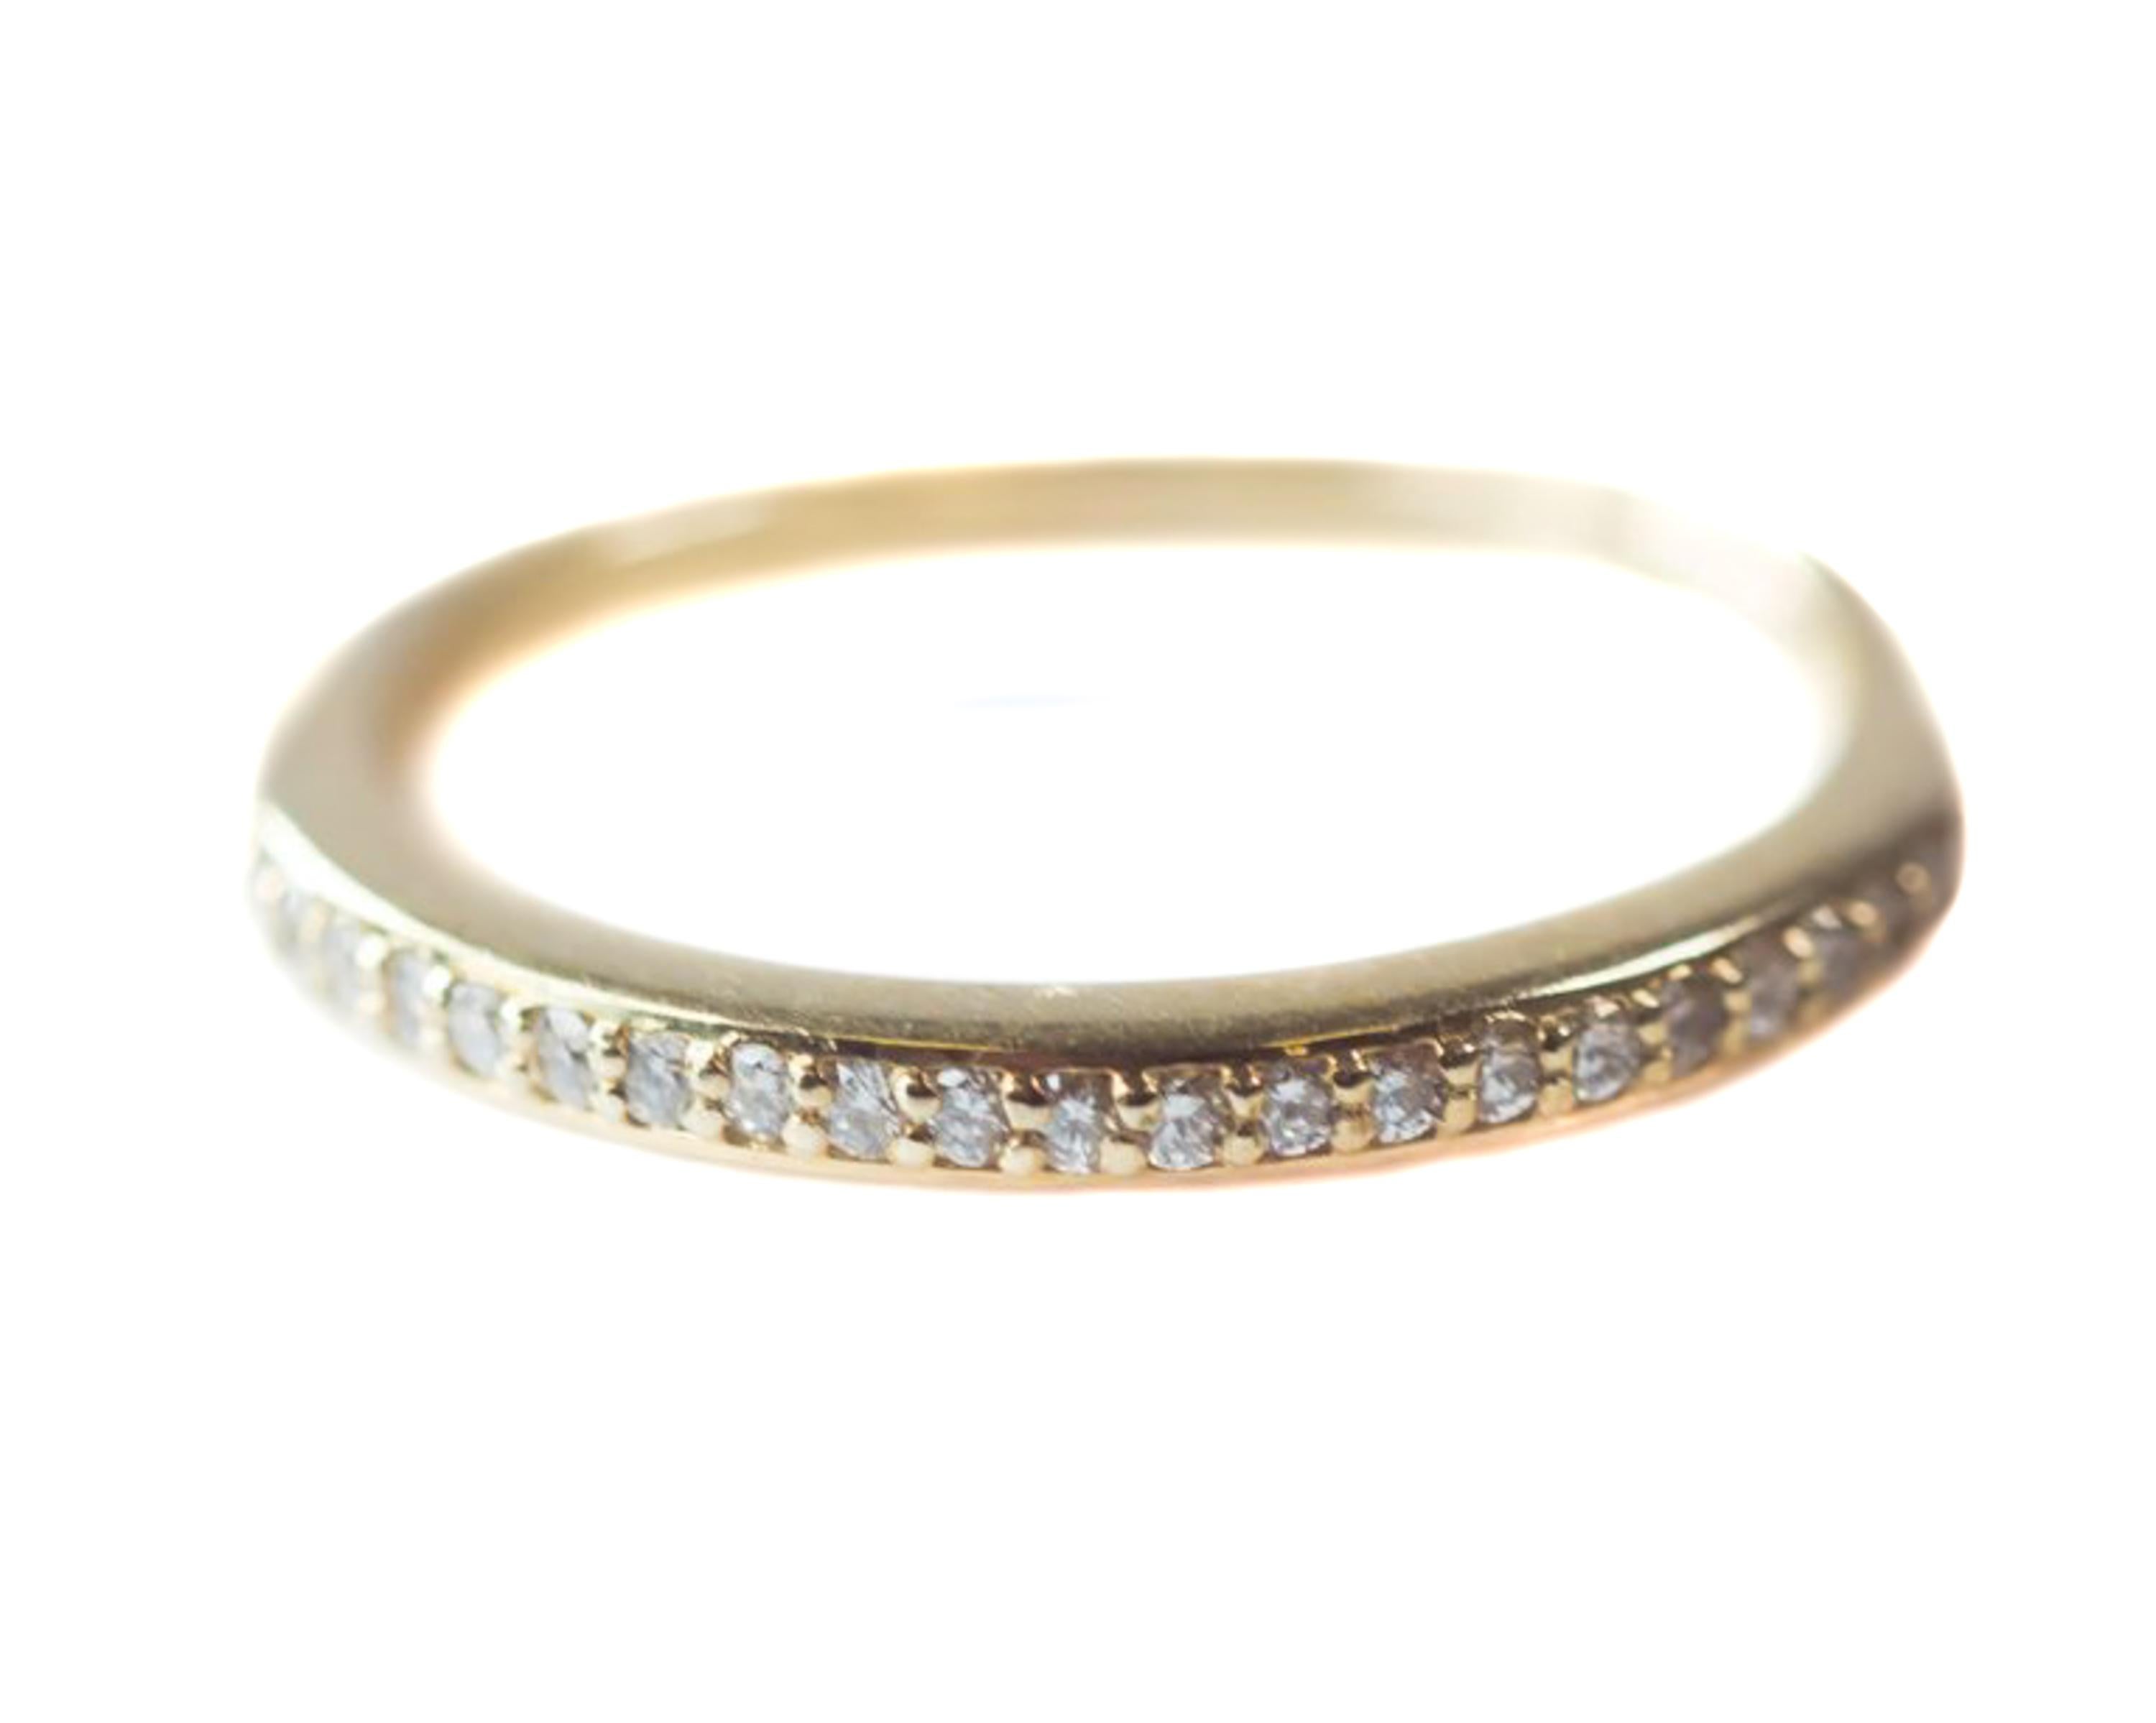 14 Karat Yellow Gold and 0.25 carat total weight Diamond Eternity Band - Halfway around eternity band

Features 0.25 cttw Round Brilliant Diamonds prong set in 14K Yellow Gold. The front half of the ring is covered in Diamonds. The back half of the